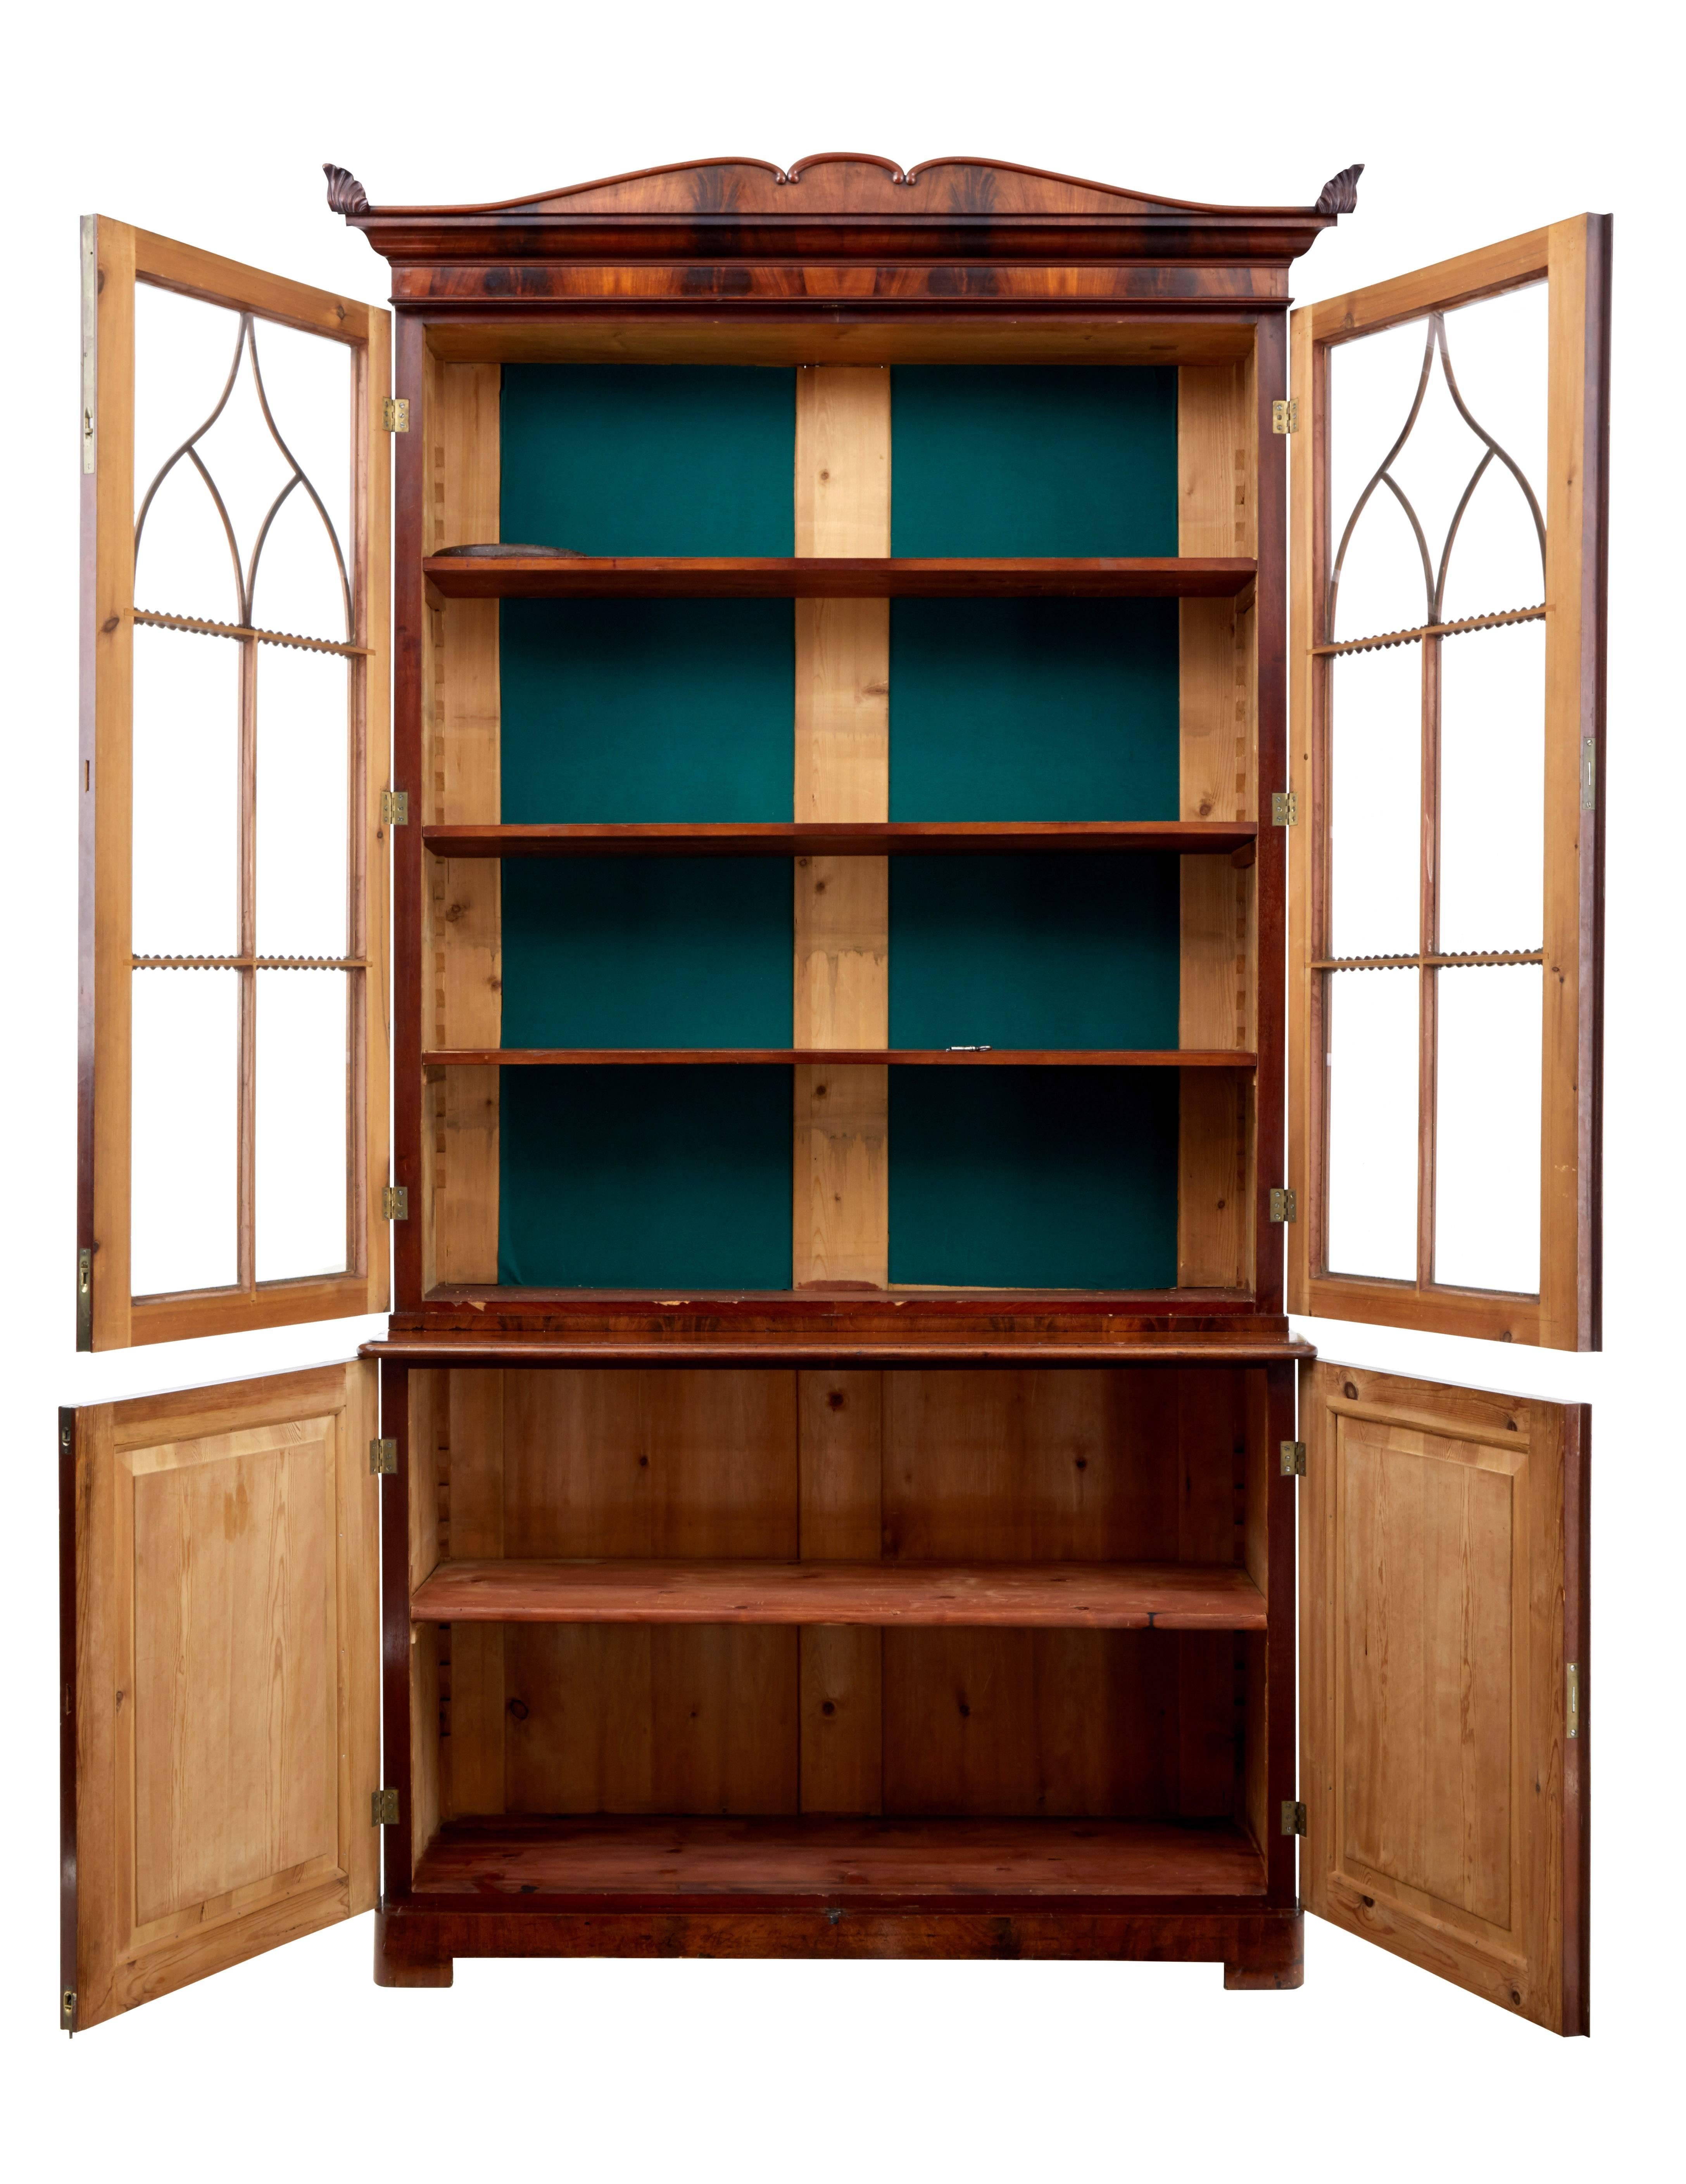 Beautiful quality flame mahogany bookcase from Sweden, circa 1830.
Comprising of three parts, cornice, glazed bookcase and lower cupboard.
Double door glazed cabinet with applied architectural applied moulding, opens to reveal three adjustable